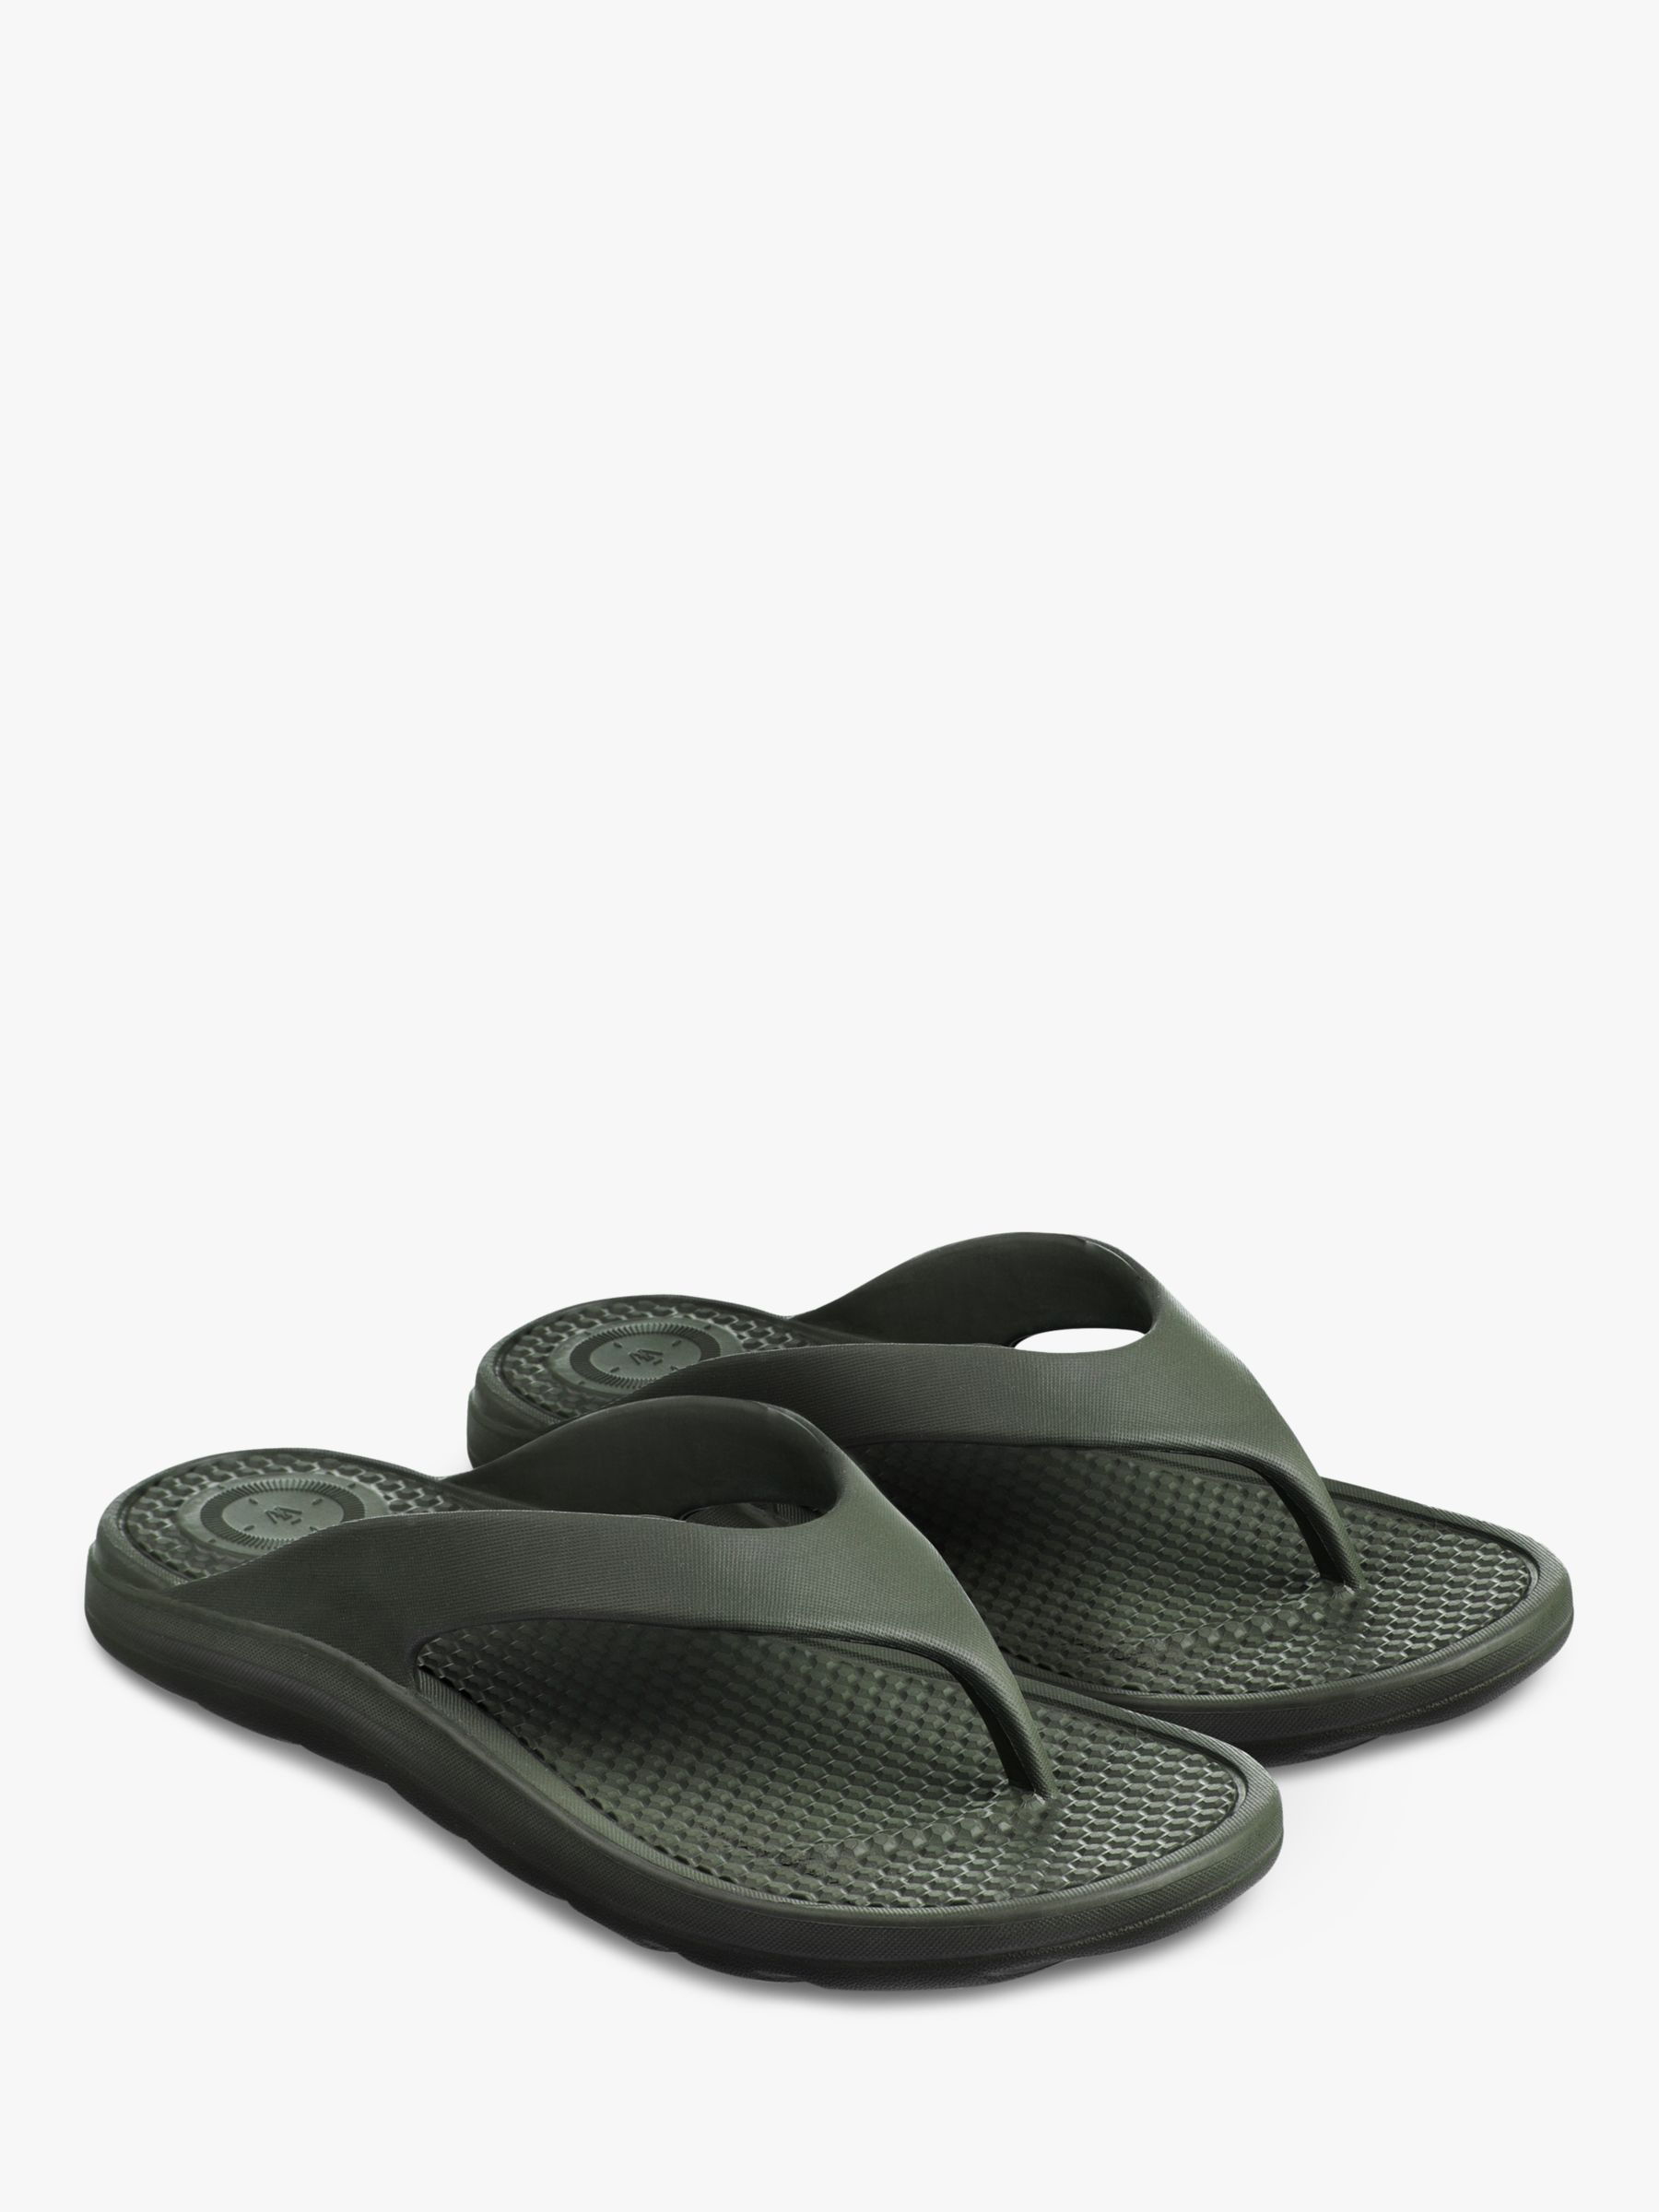 totes SOLBOUNCE Toe Post Sandals, Loden, 7